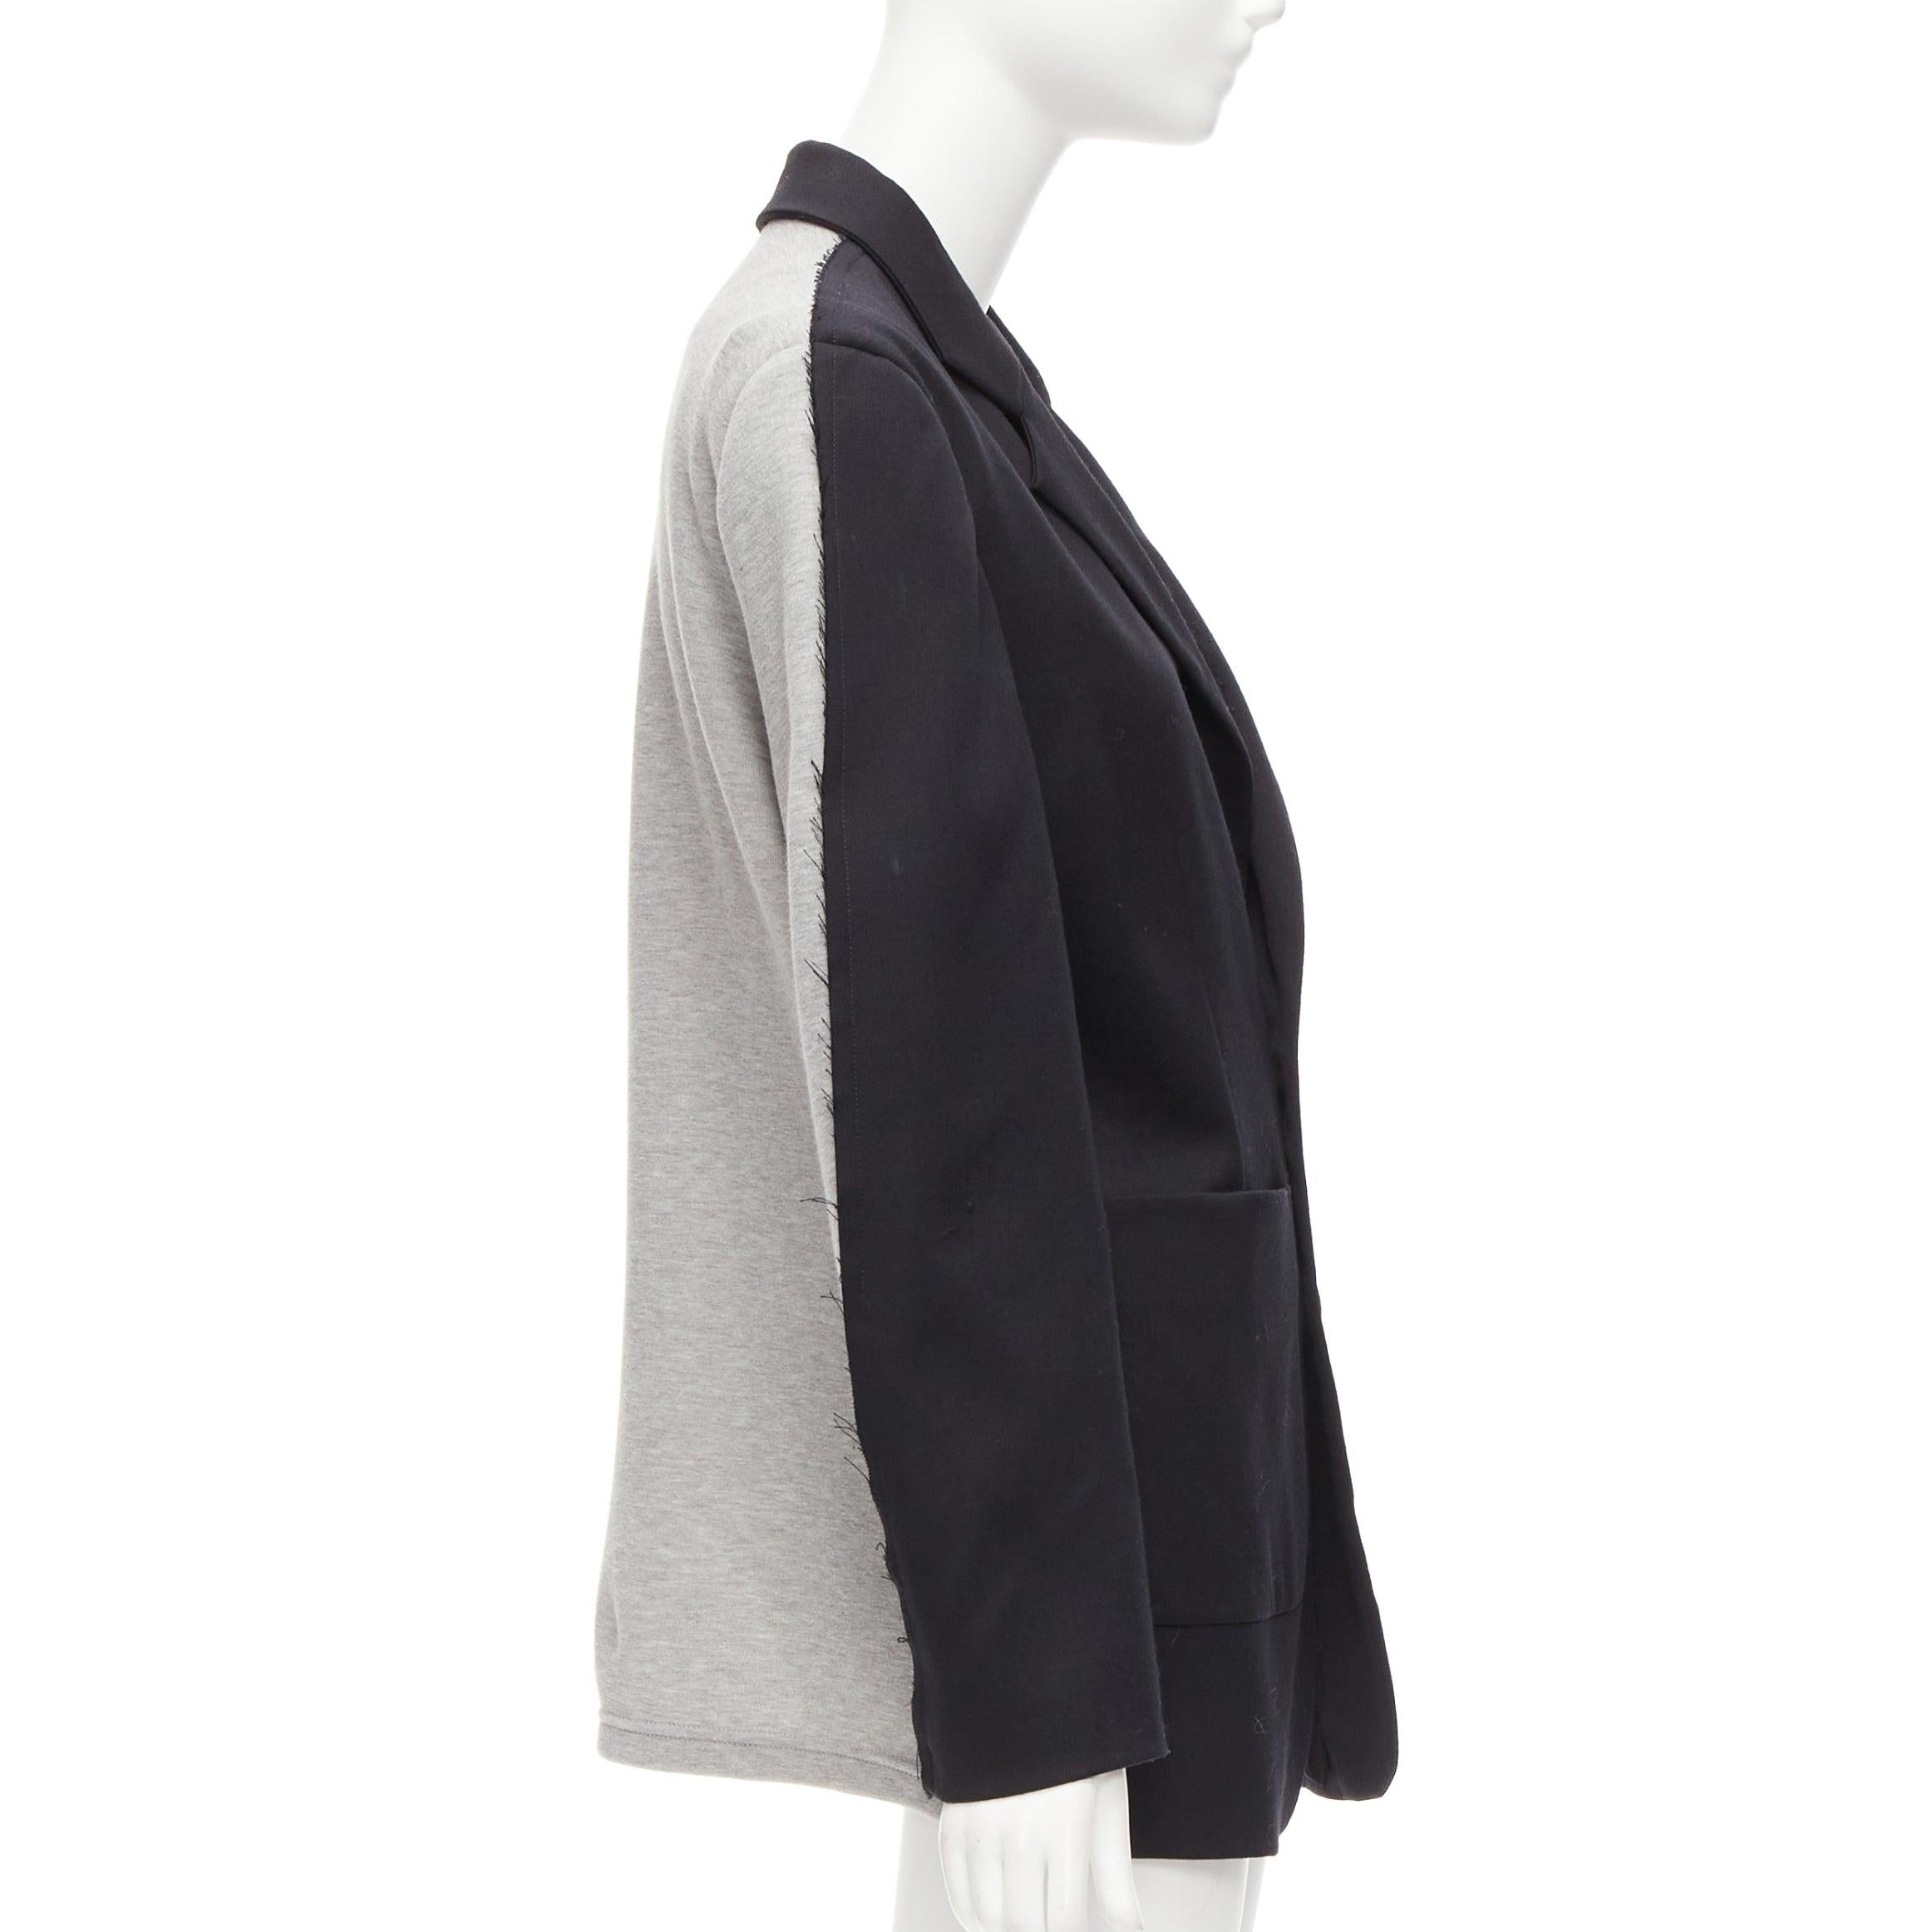 MM6 black grey virgin wool blend contrast back fray edge boxy blazer IT38 XS
Reference: DYTG/A00004
Brand: MM6
Material: Polyester, Virgin Wool, Blend
Color: Black, Grey
Pattern: Solid
Closure: Button
Lining: Black Fabric
Extra Details: 3 front